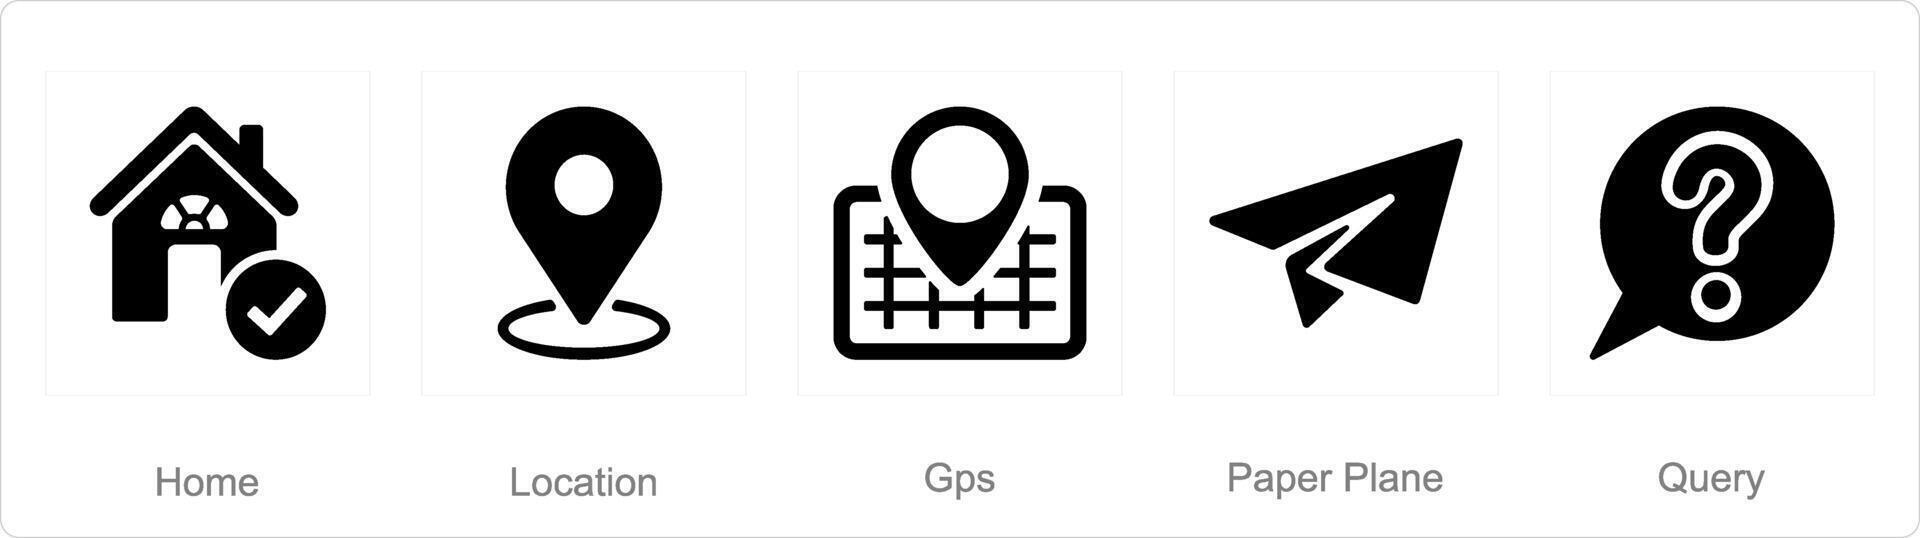 A set of 5 Contact icons as home, location, gps vector